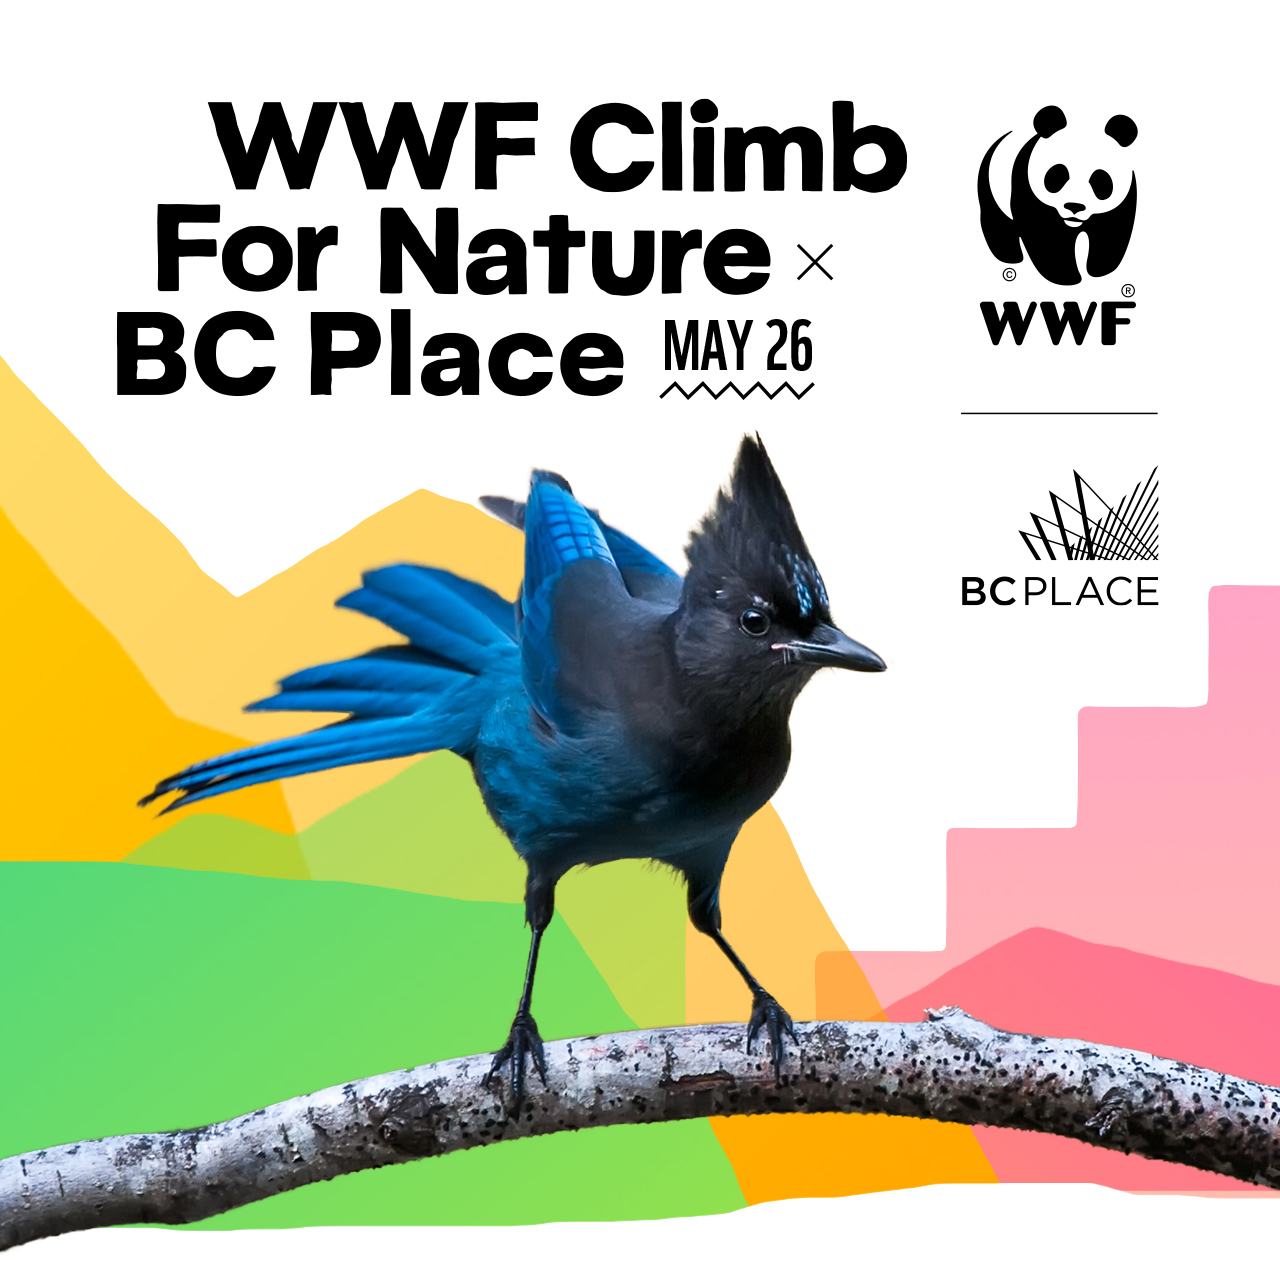 A blue and black bird sits on a branch with coloured steps in the background. The text says "WWF Climb for Nature x BC Place. May 26."